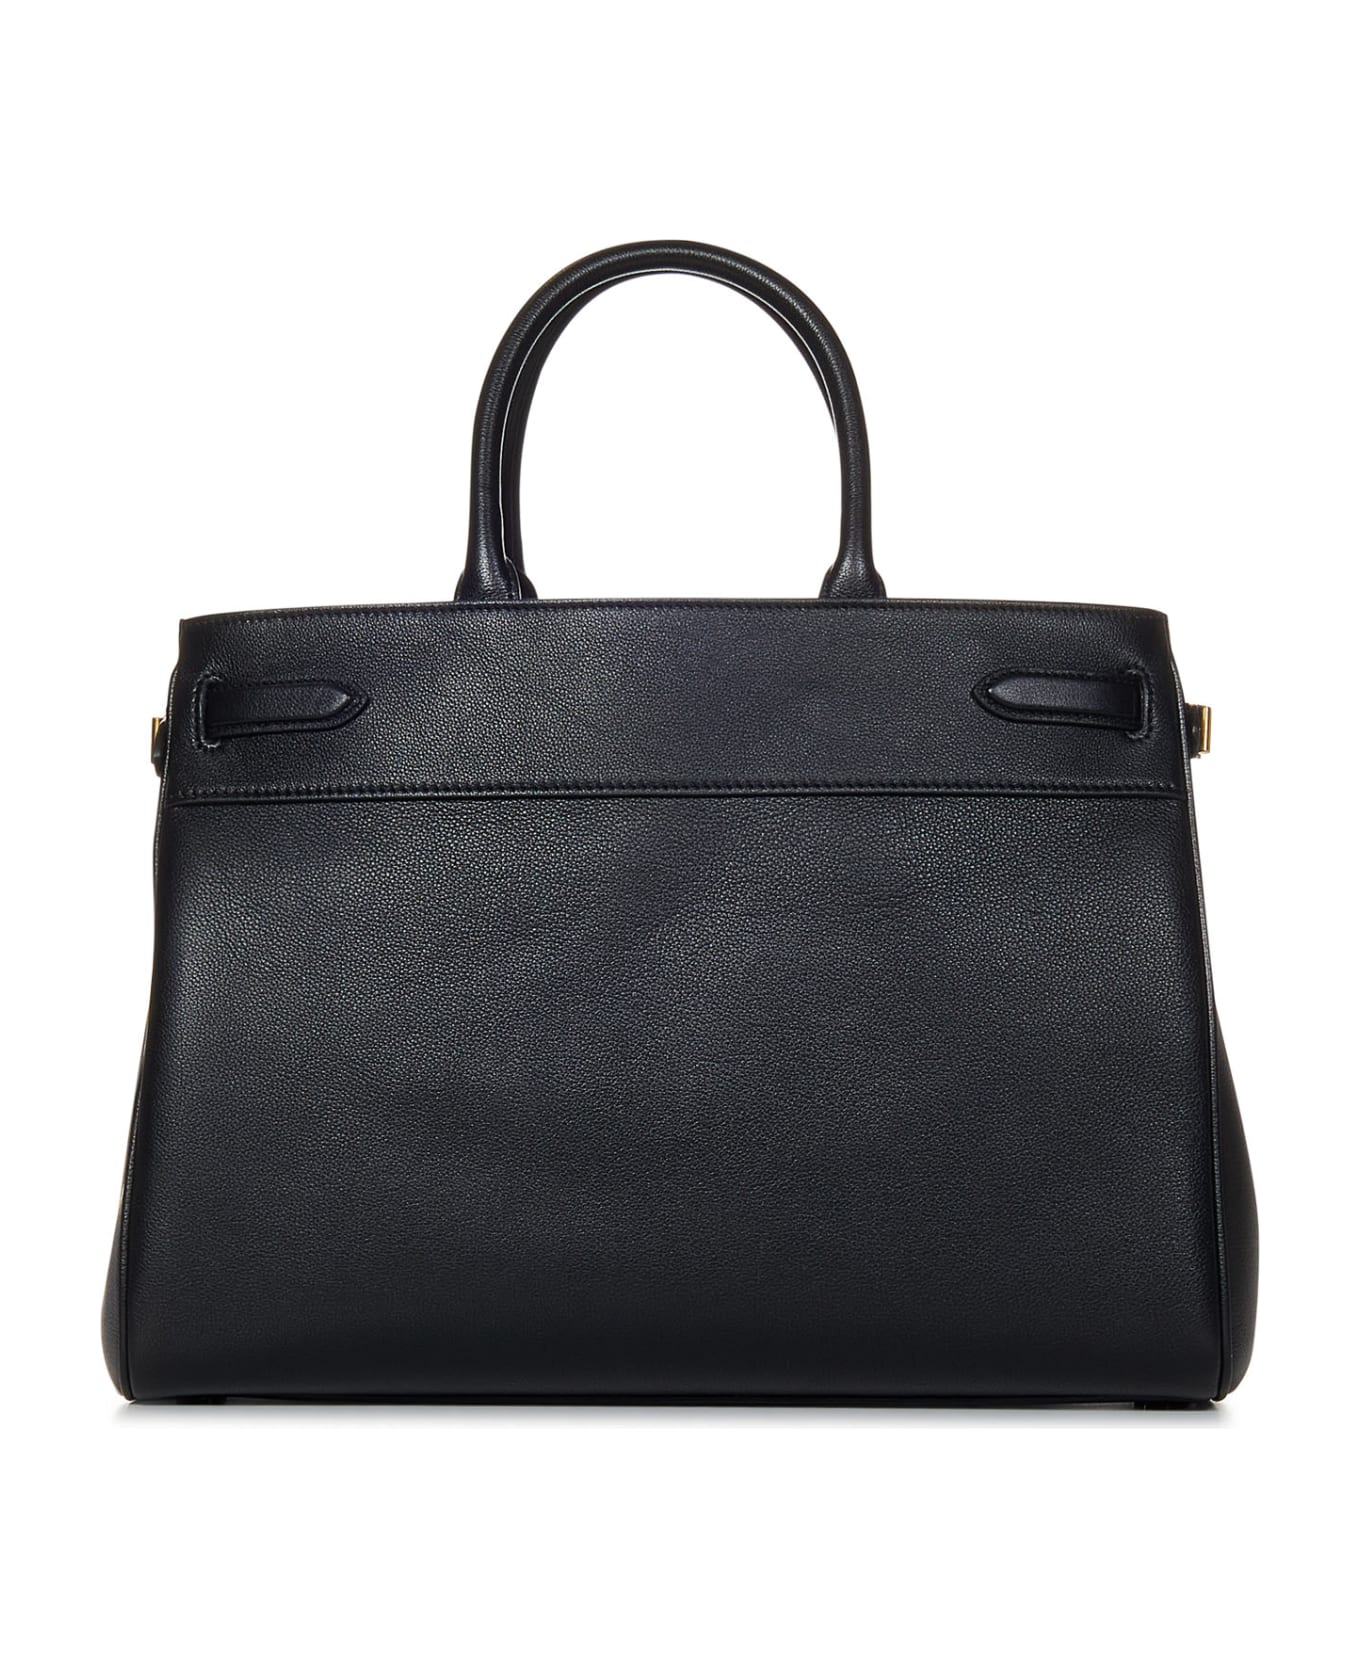 Tom Ford Whitney Large Tote - BLACK トートバッグ